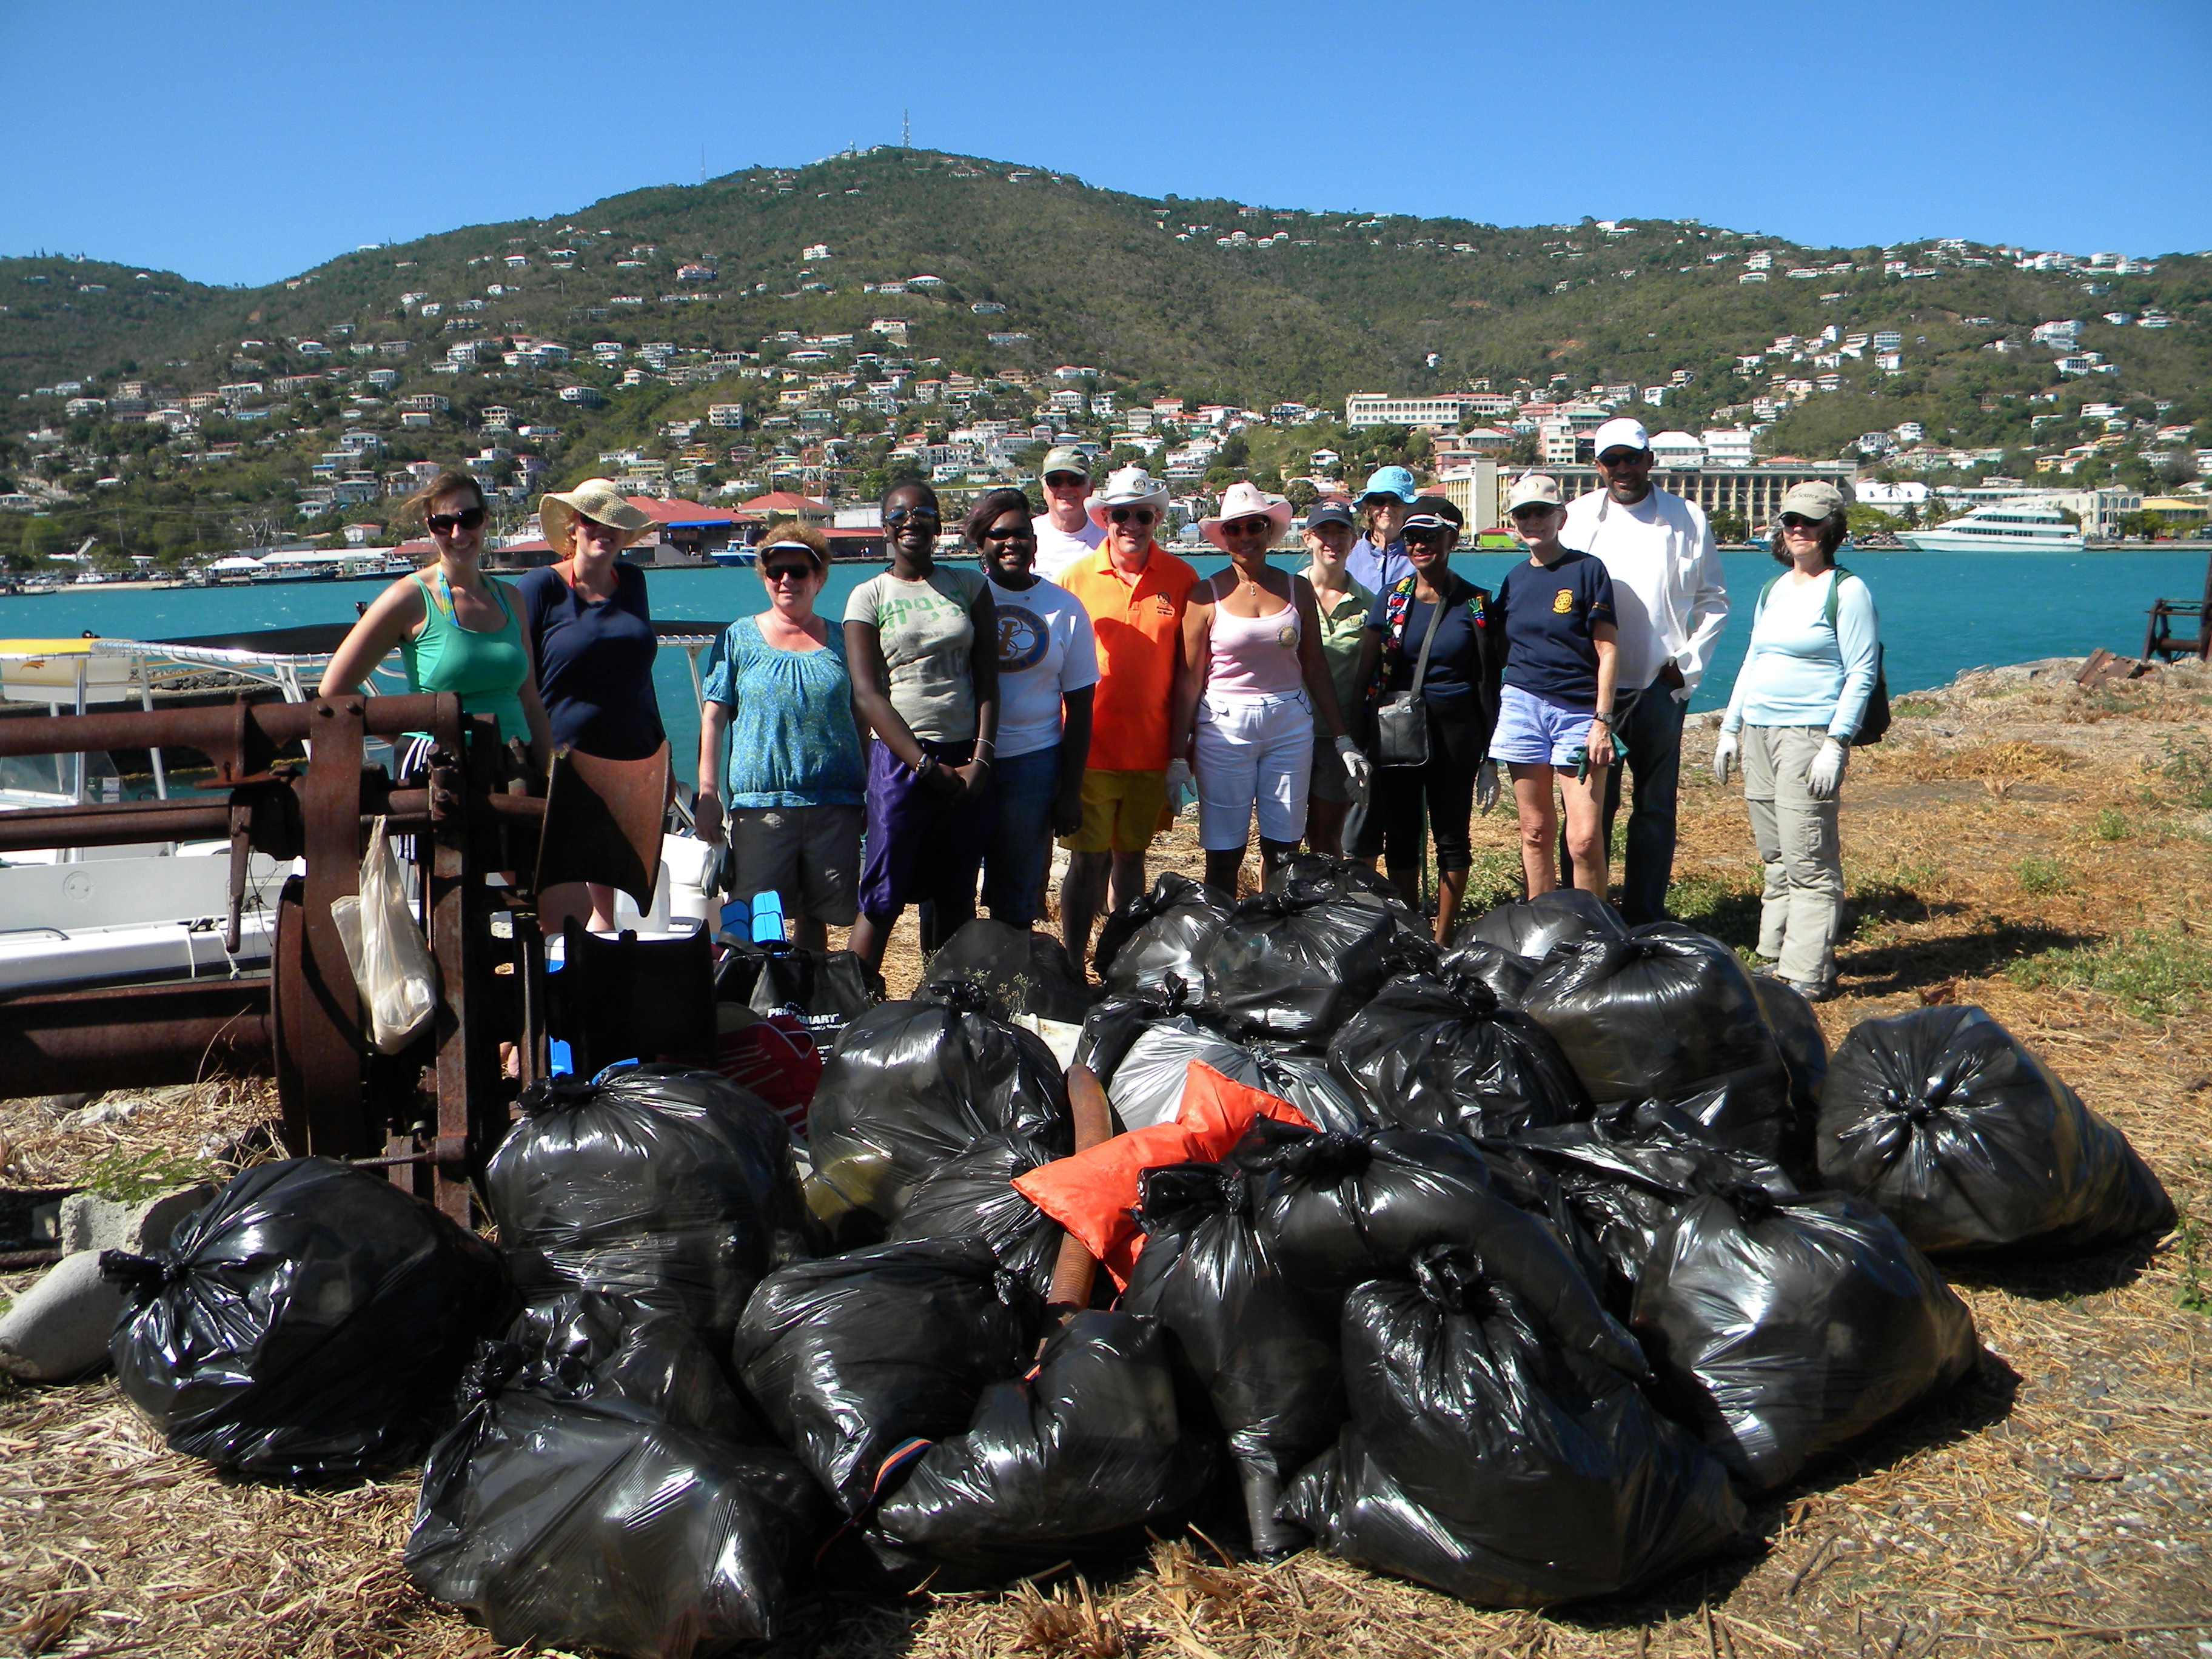 The Rotary Clubs of St Thomas Sunrise and EAST, plus two Interact members from VI Monessori Academy, had a personal tour of Hassel Island's Creque slipway led by St Thomas Historical Trust board member Charles Consolvo and then followed it up by doing a clean-up. 30 bags of trash were hauled off.